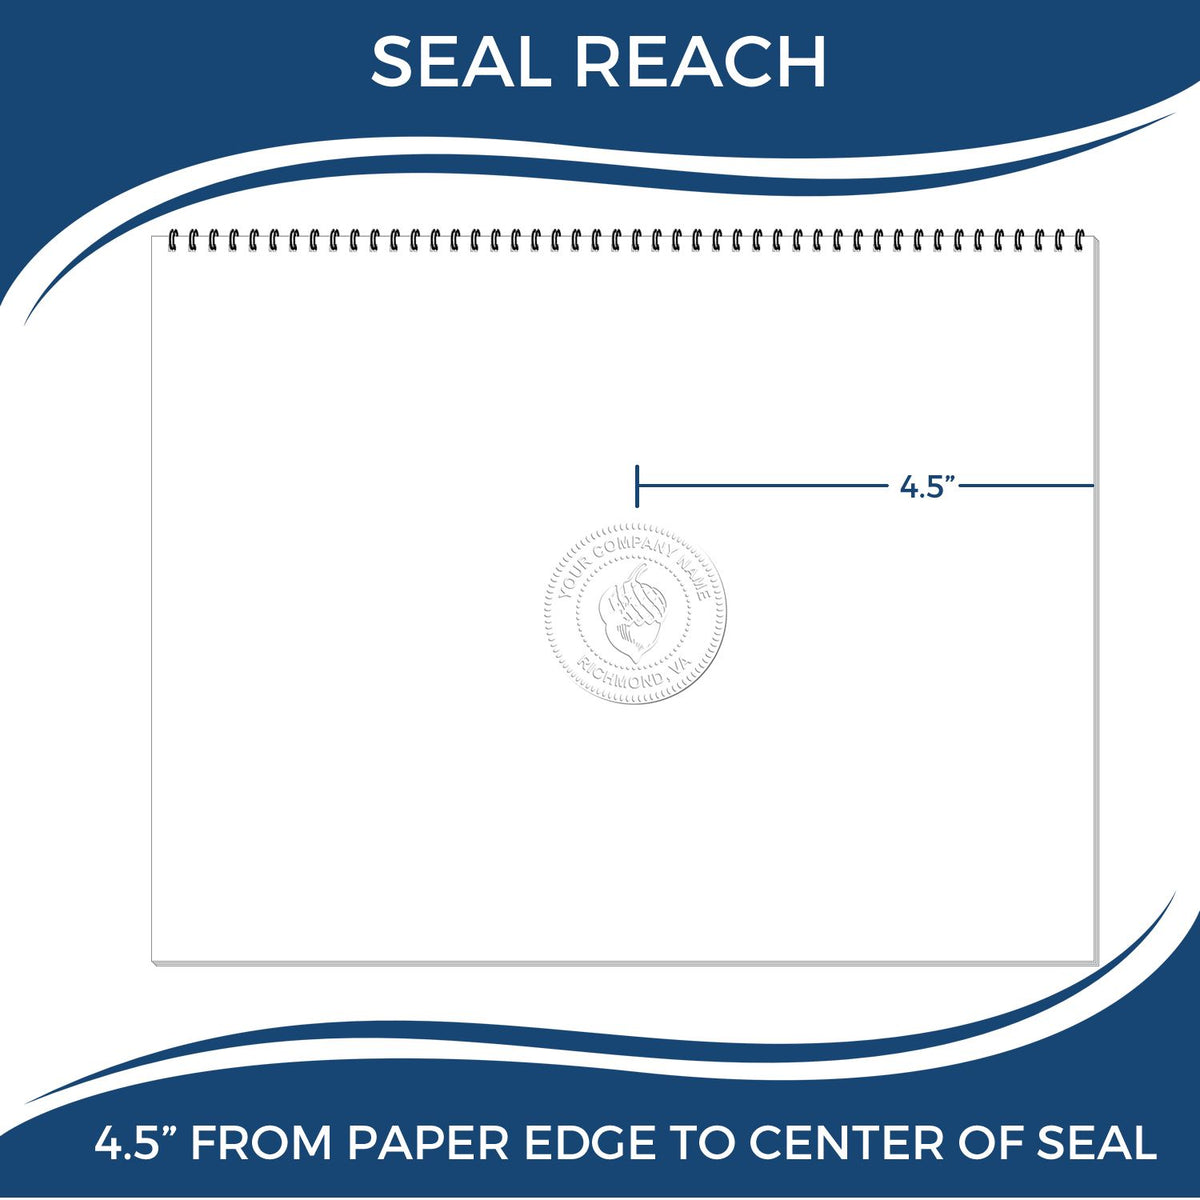 An infographic showing the seal reach which is represented by a ruler and a miniature seal image of the State of Ohio Extended Long Reach Engineer Seal